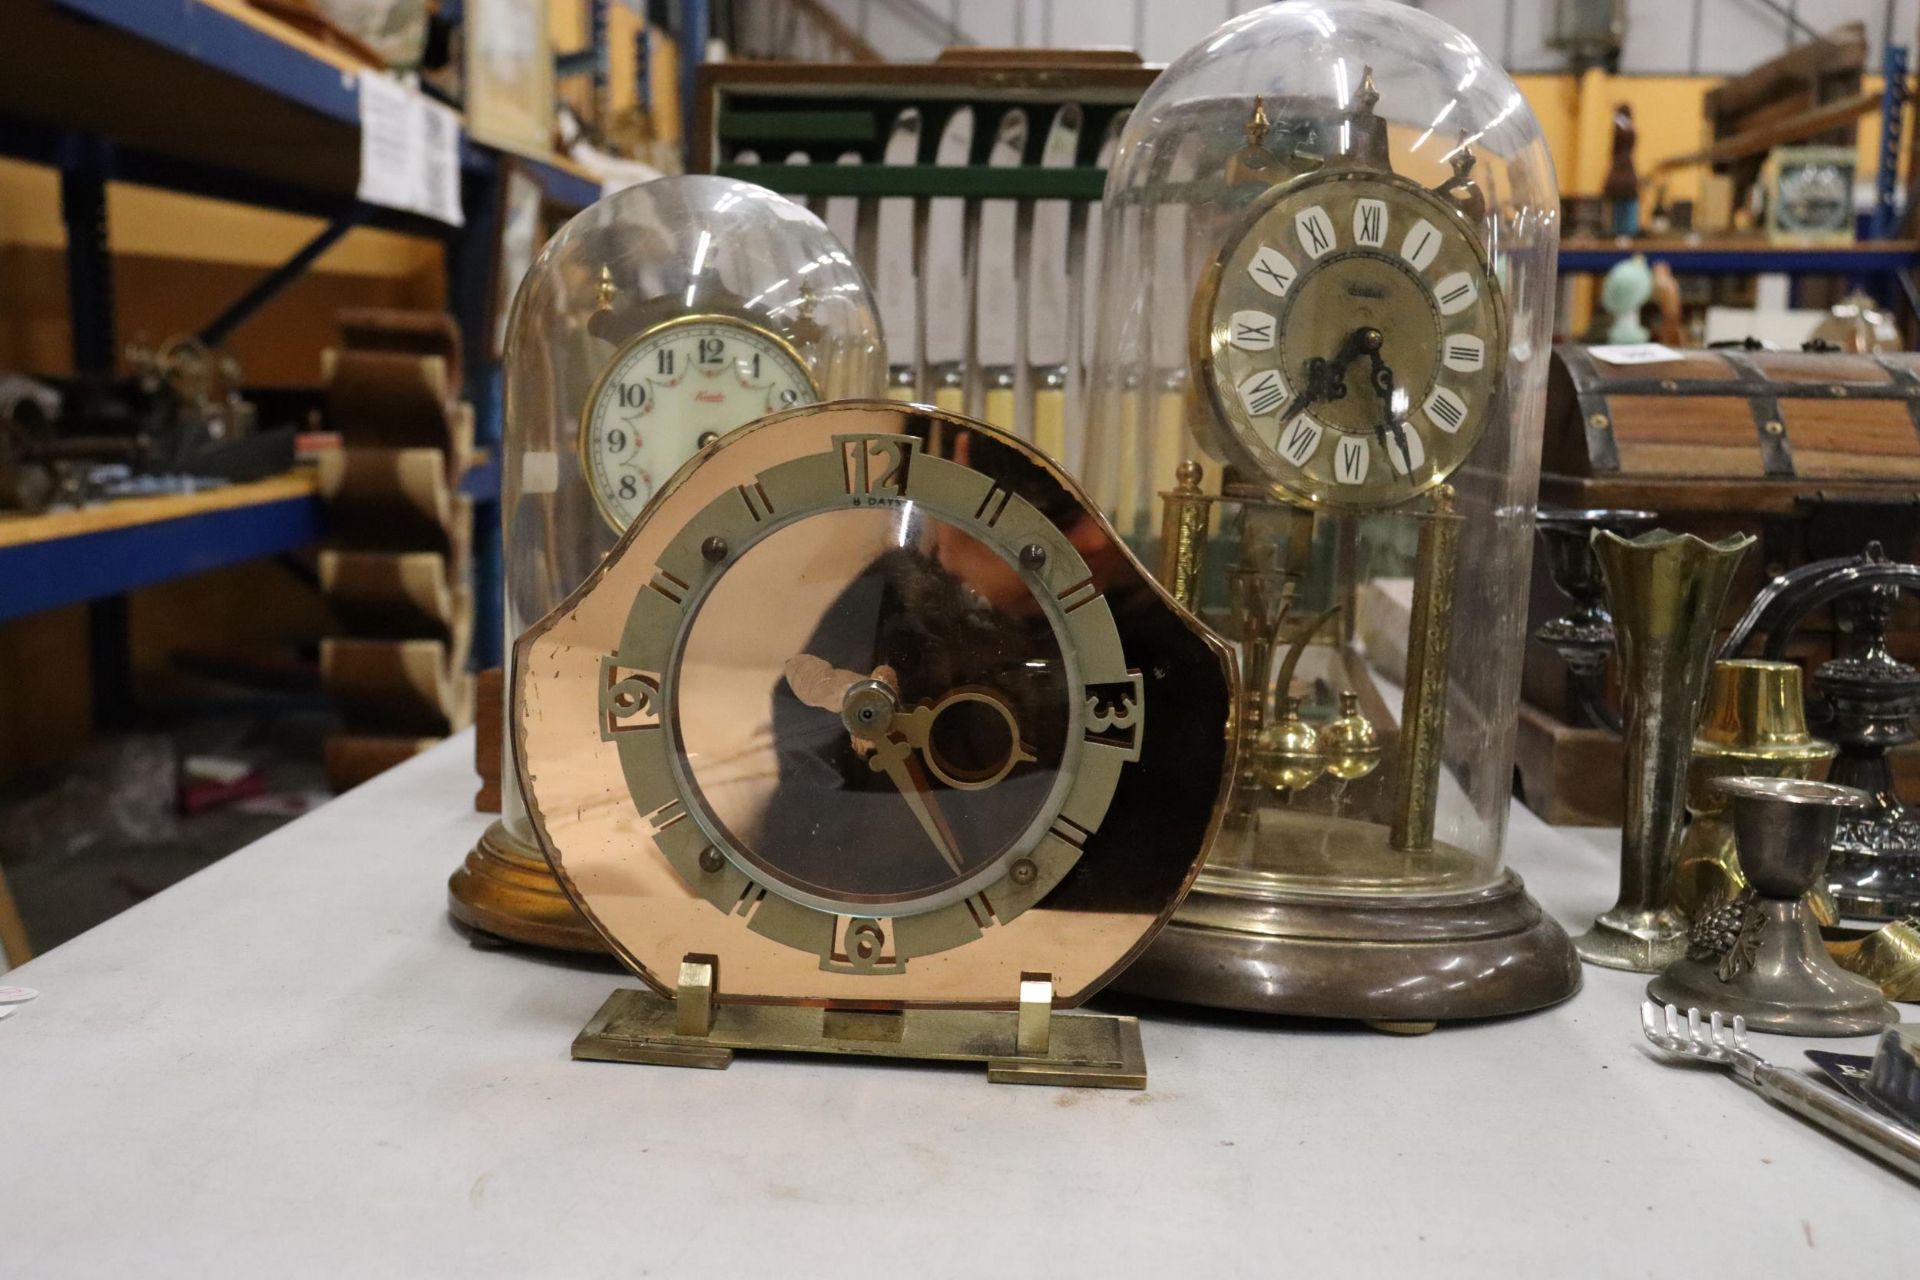 TWO VINTAGE ANNIVERSARY CLOCKS IN DOMES PLUS A MANTLE CLOCK